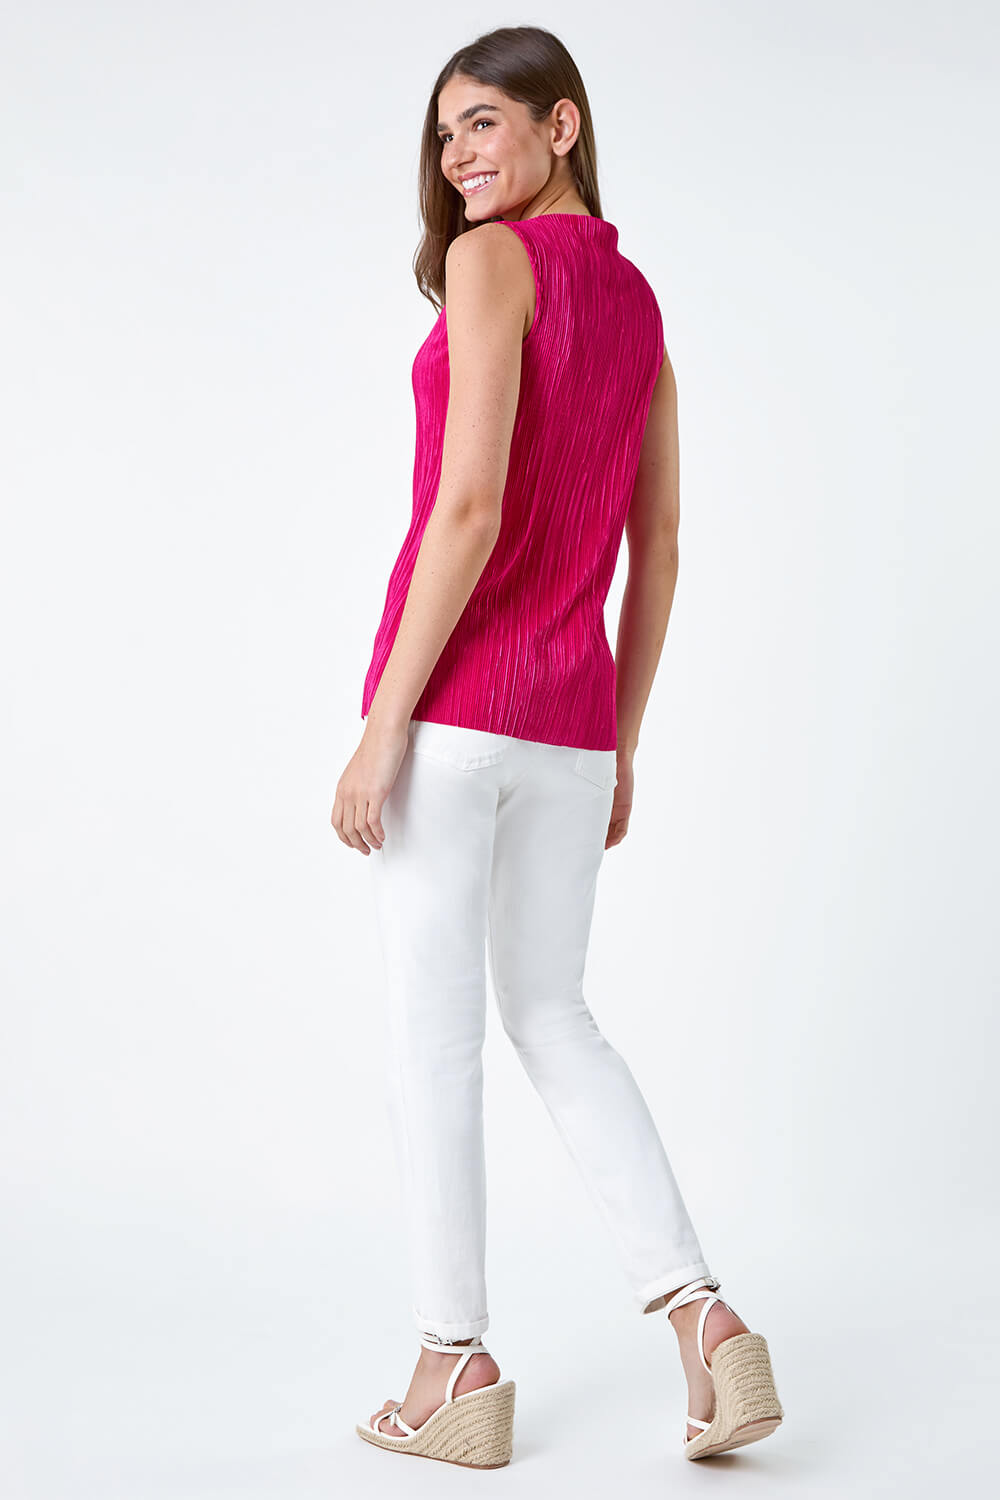 PINK Plisse High Neck Stretch Top, Image 3 of 5